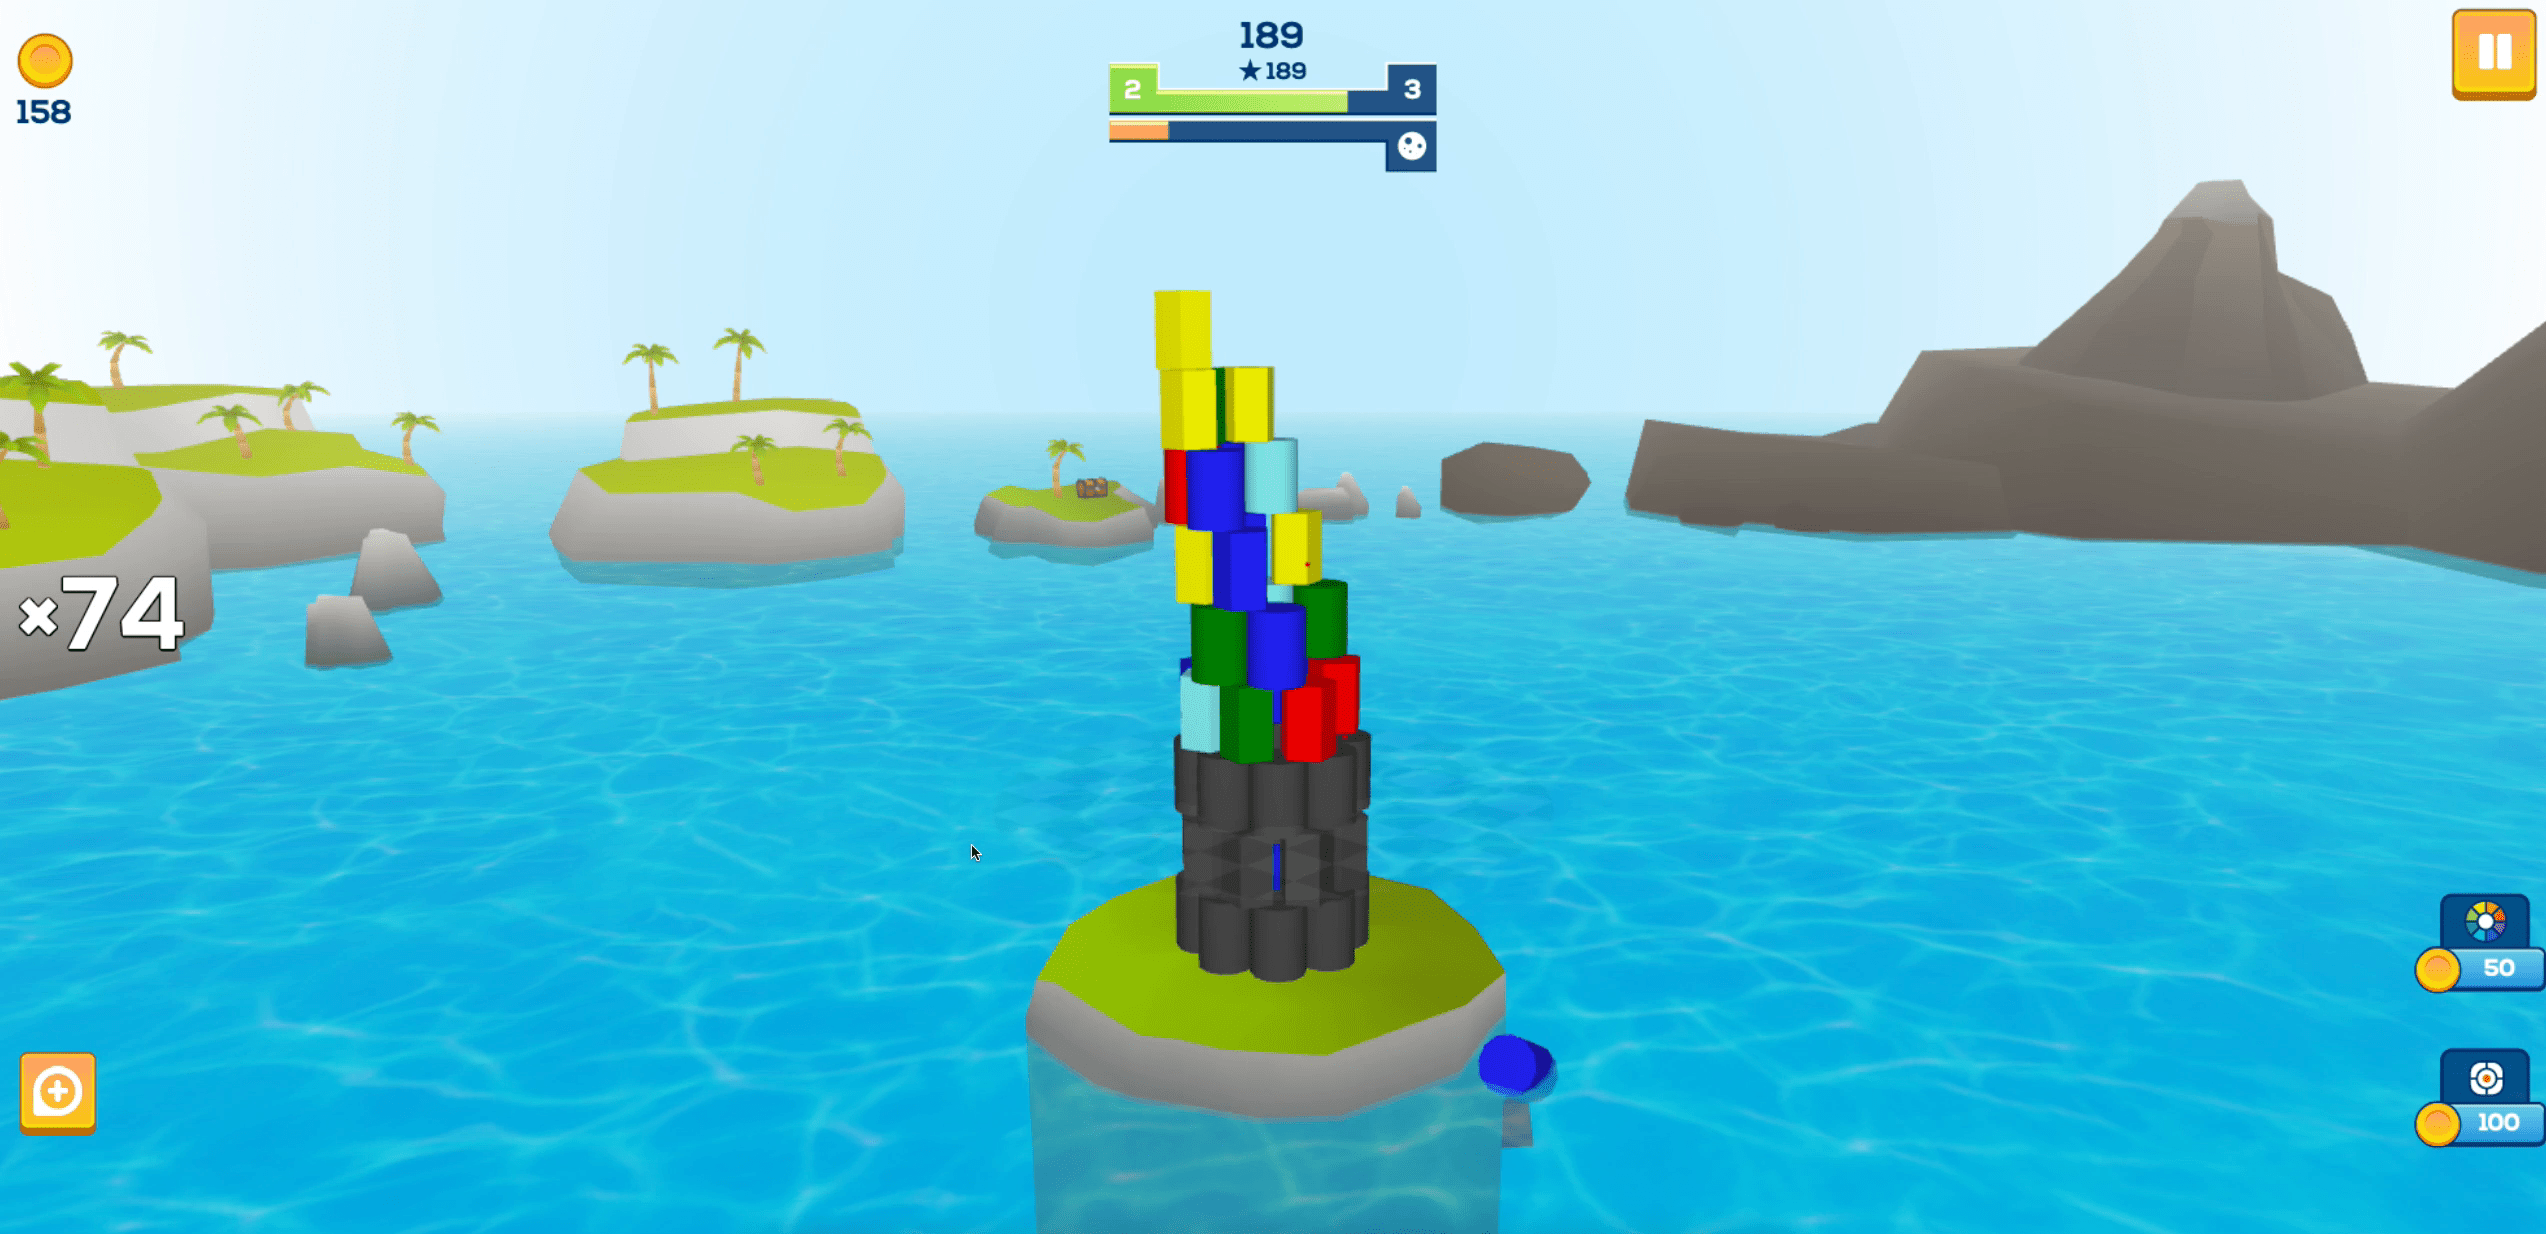 Tower of Colors: Island Edition Screenshot 1